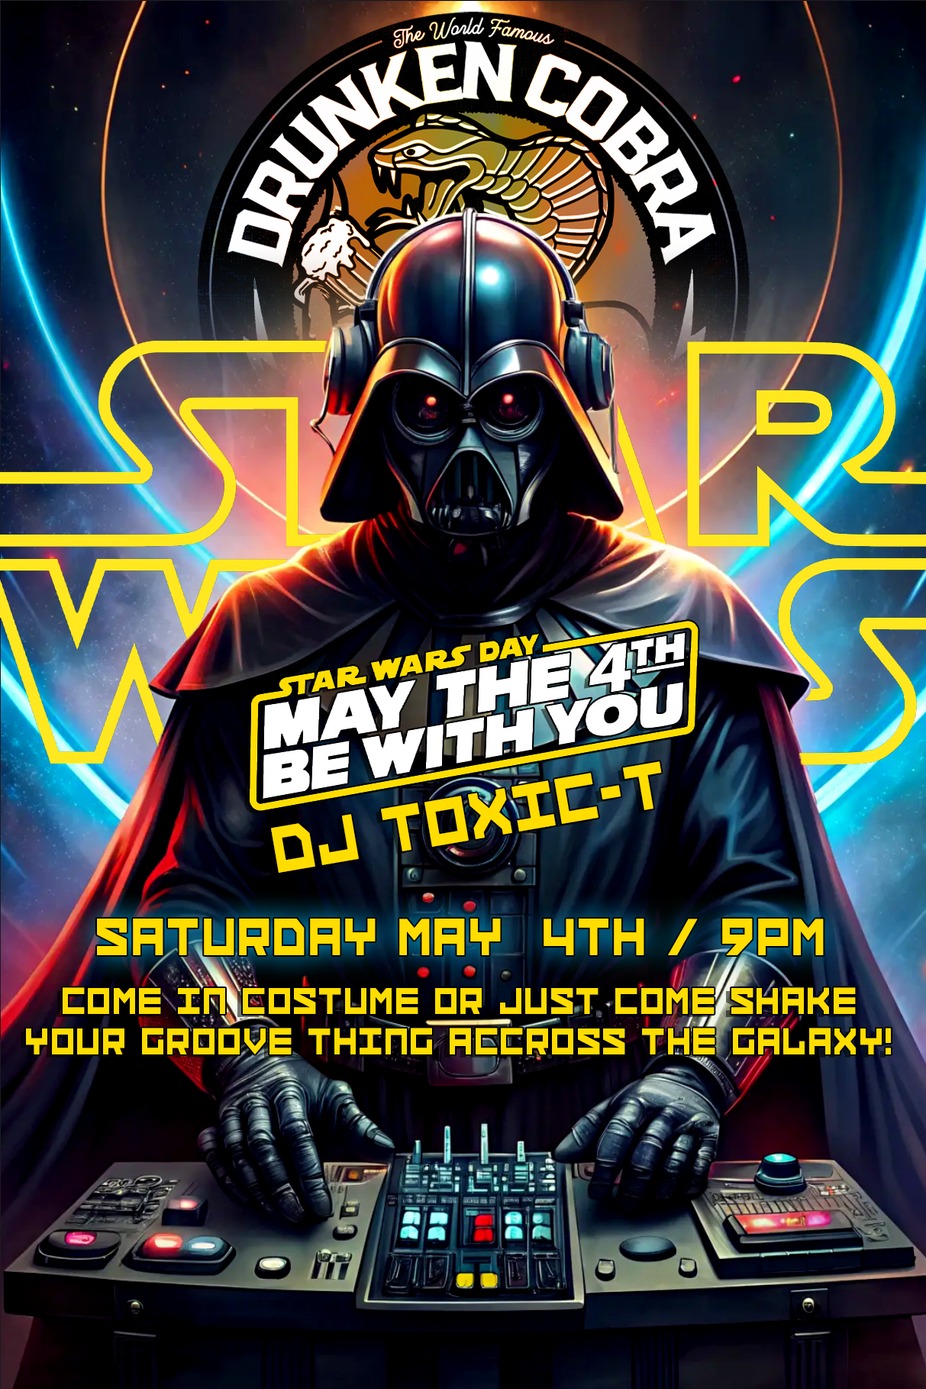 May the Fourth! Dj Toxic-T event photo